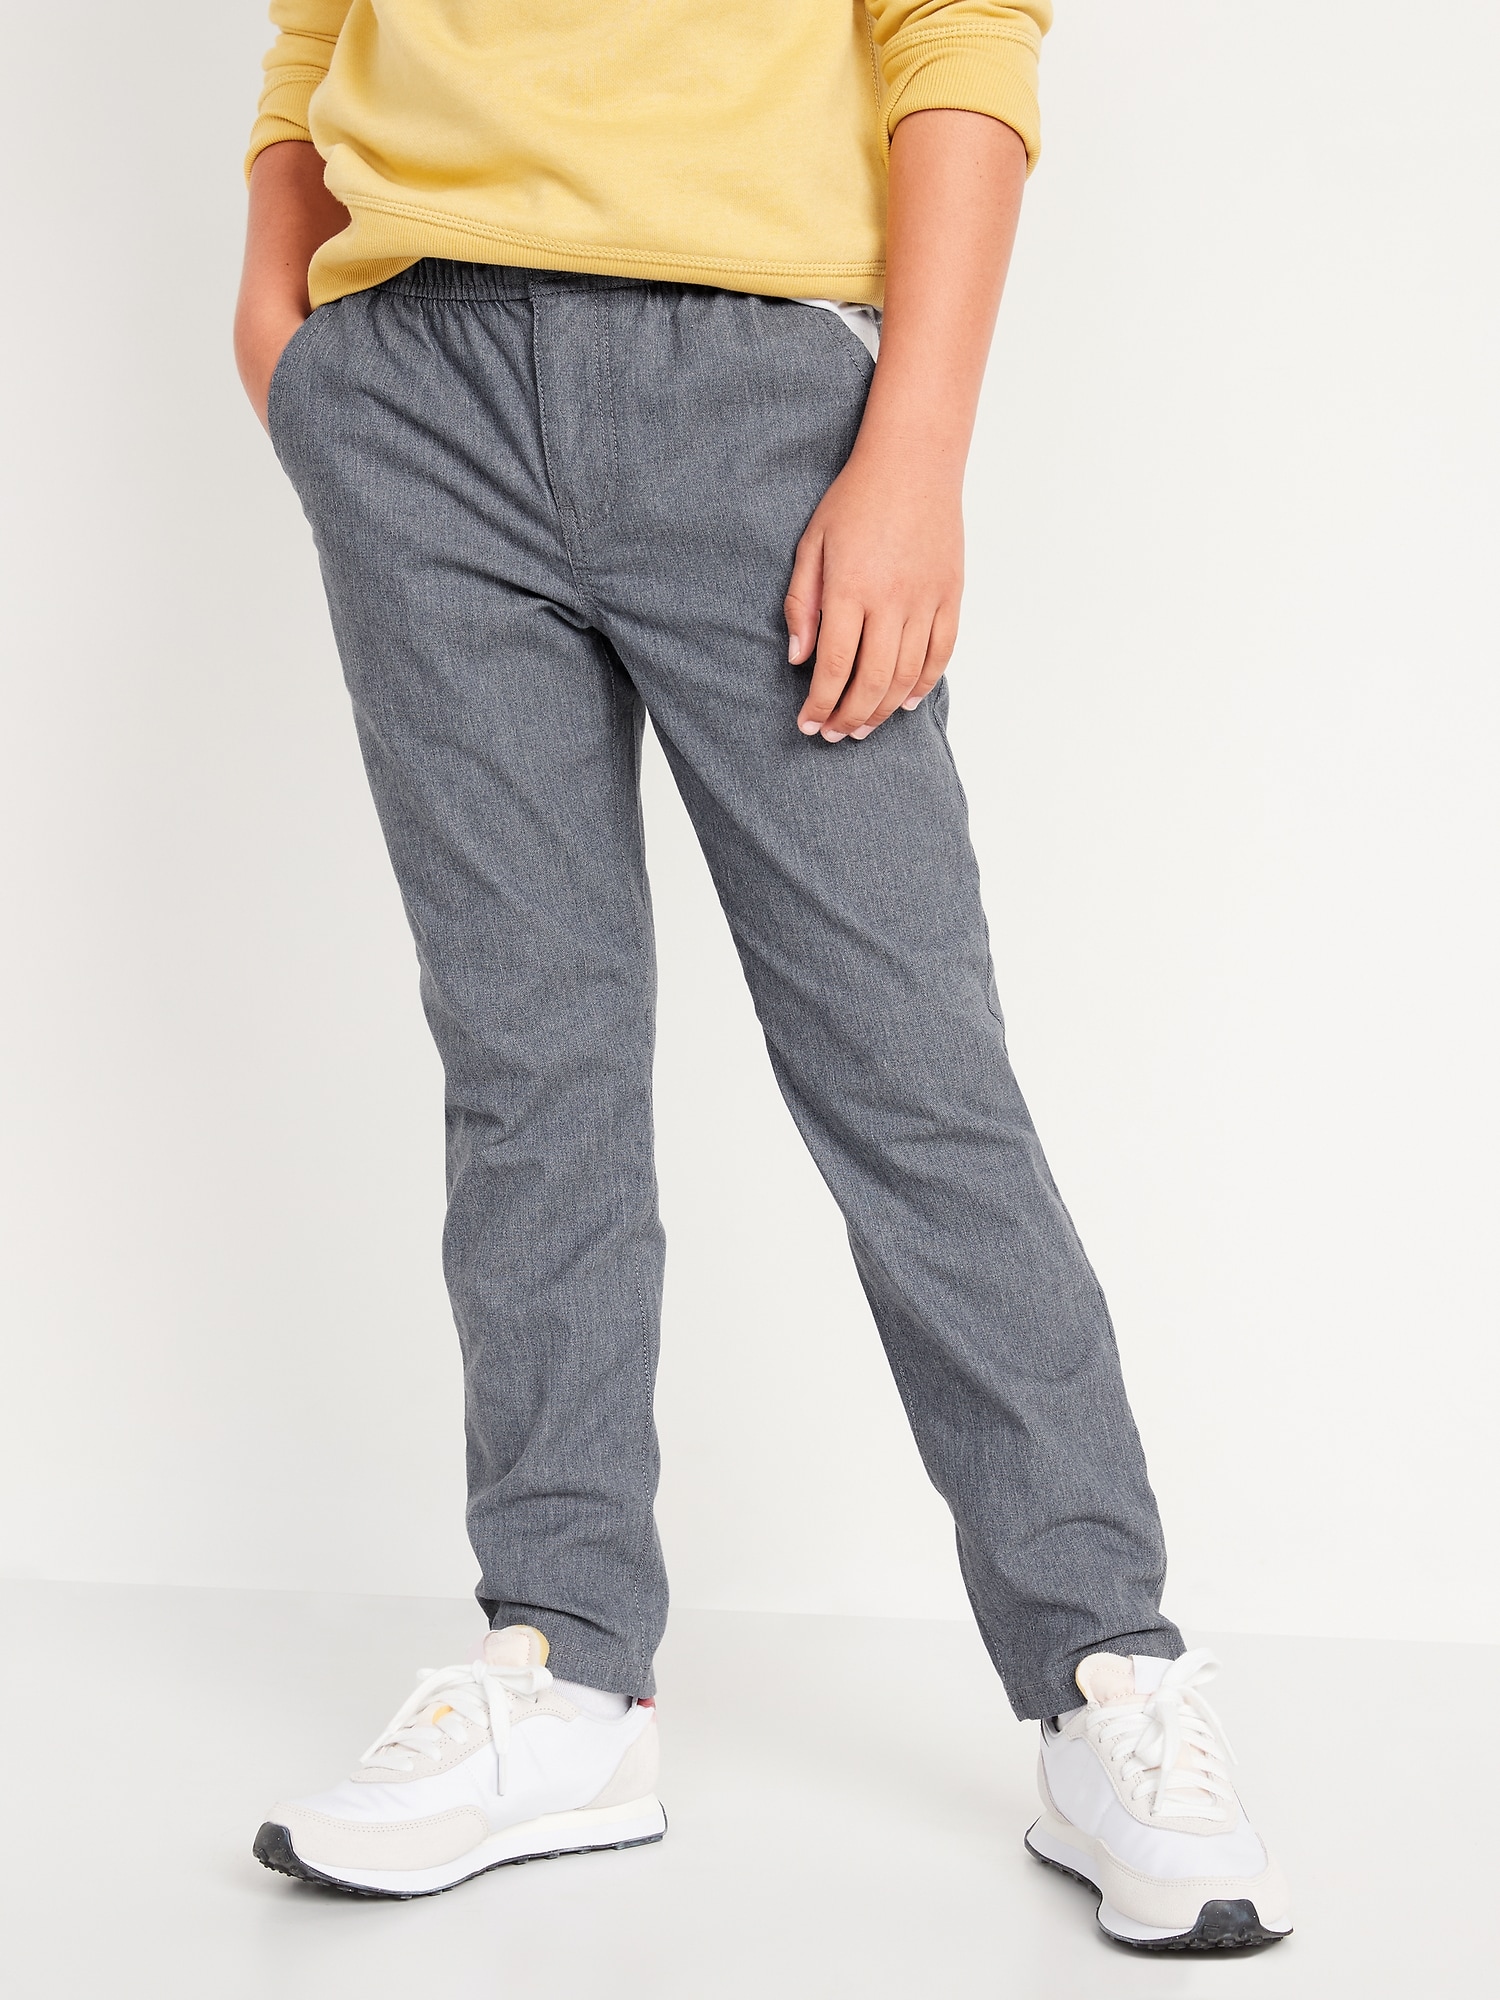 Slim Taper Textured OGC Chino Pants for Boys | Old Navy